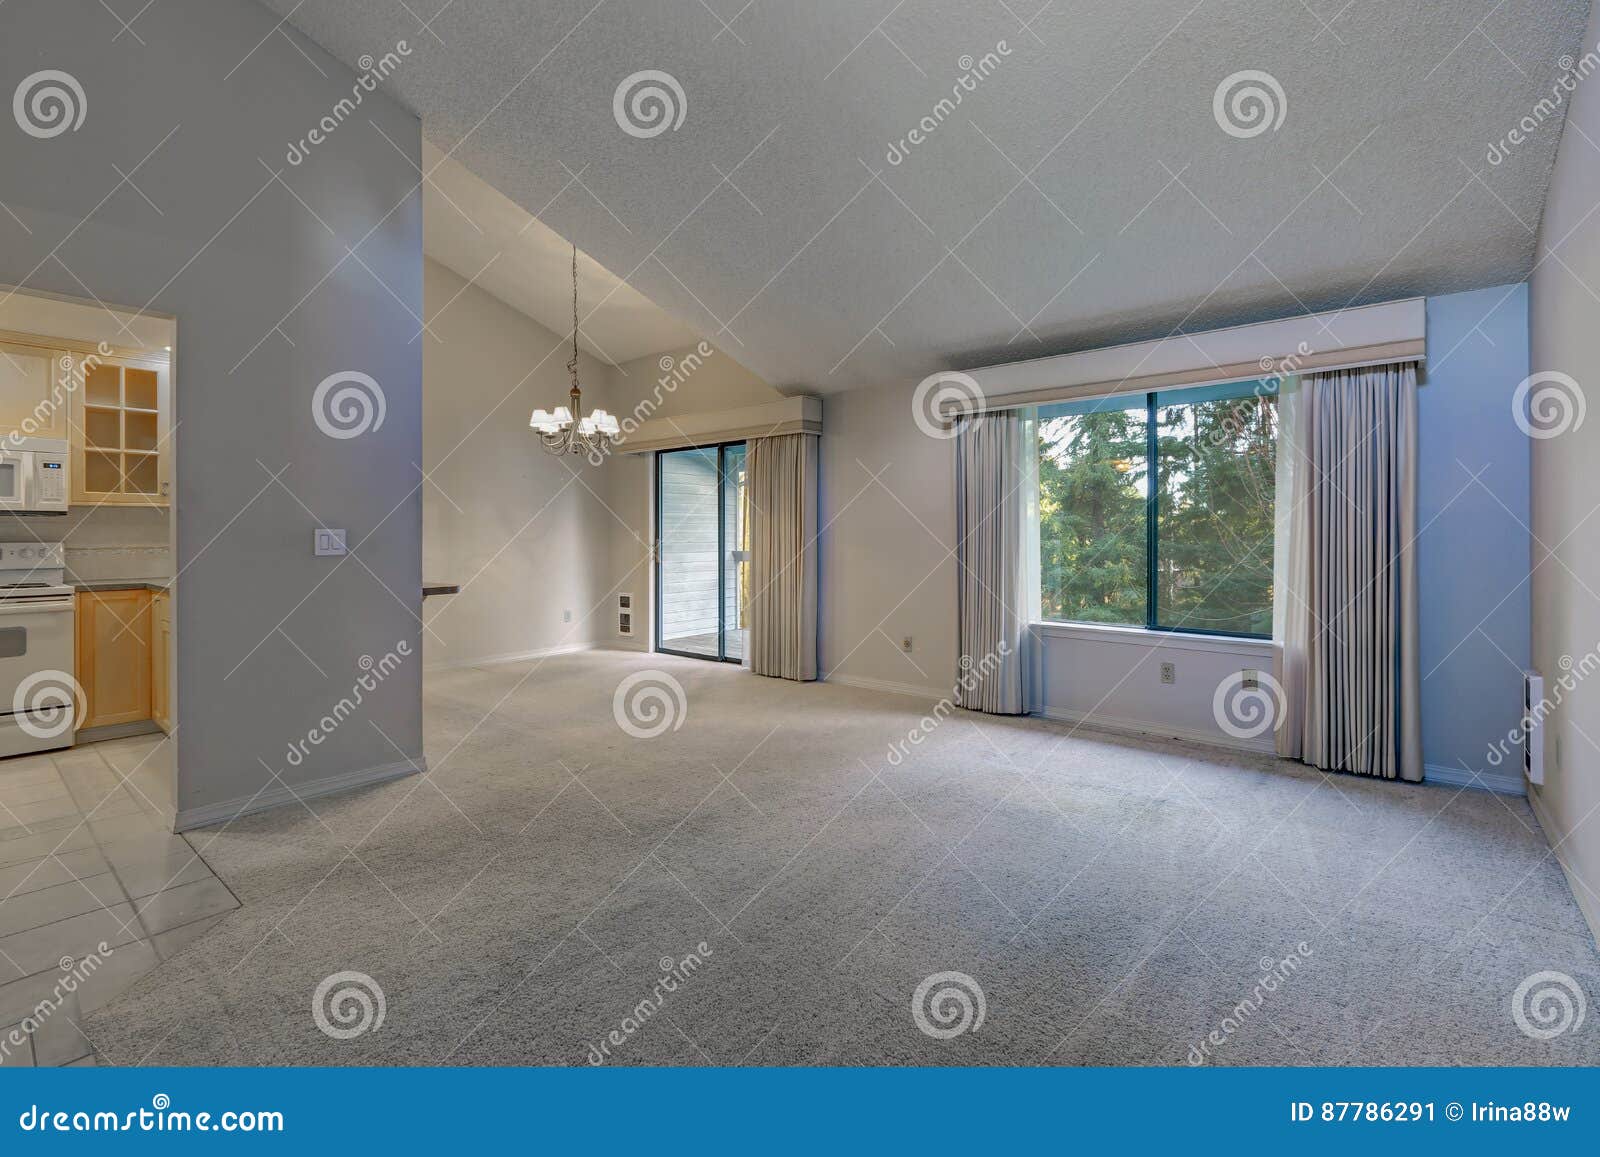 Empty Dining Space With Vaulted Ceiling And Grey Walls Stock